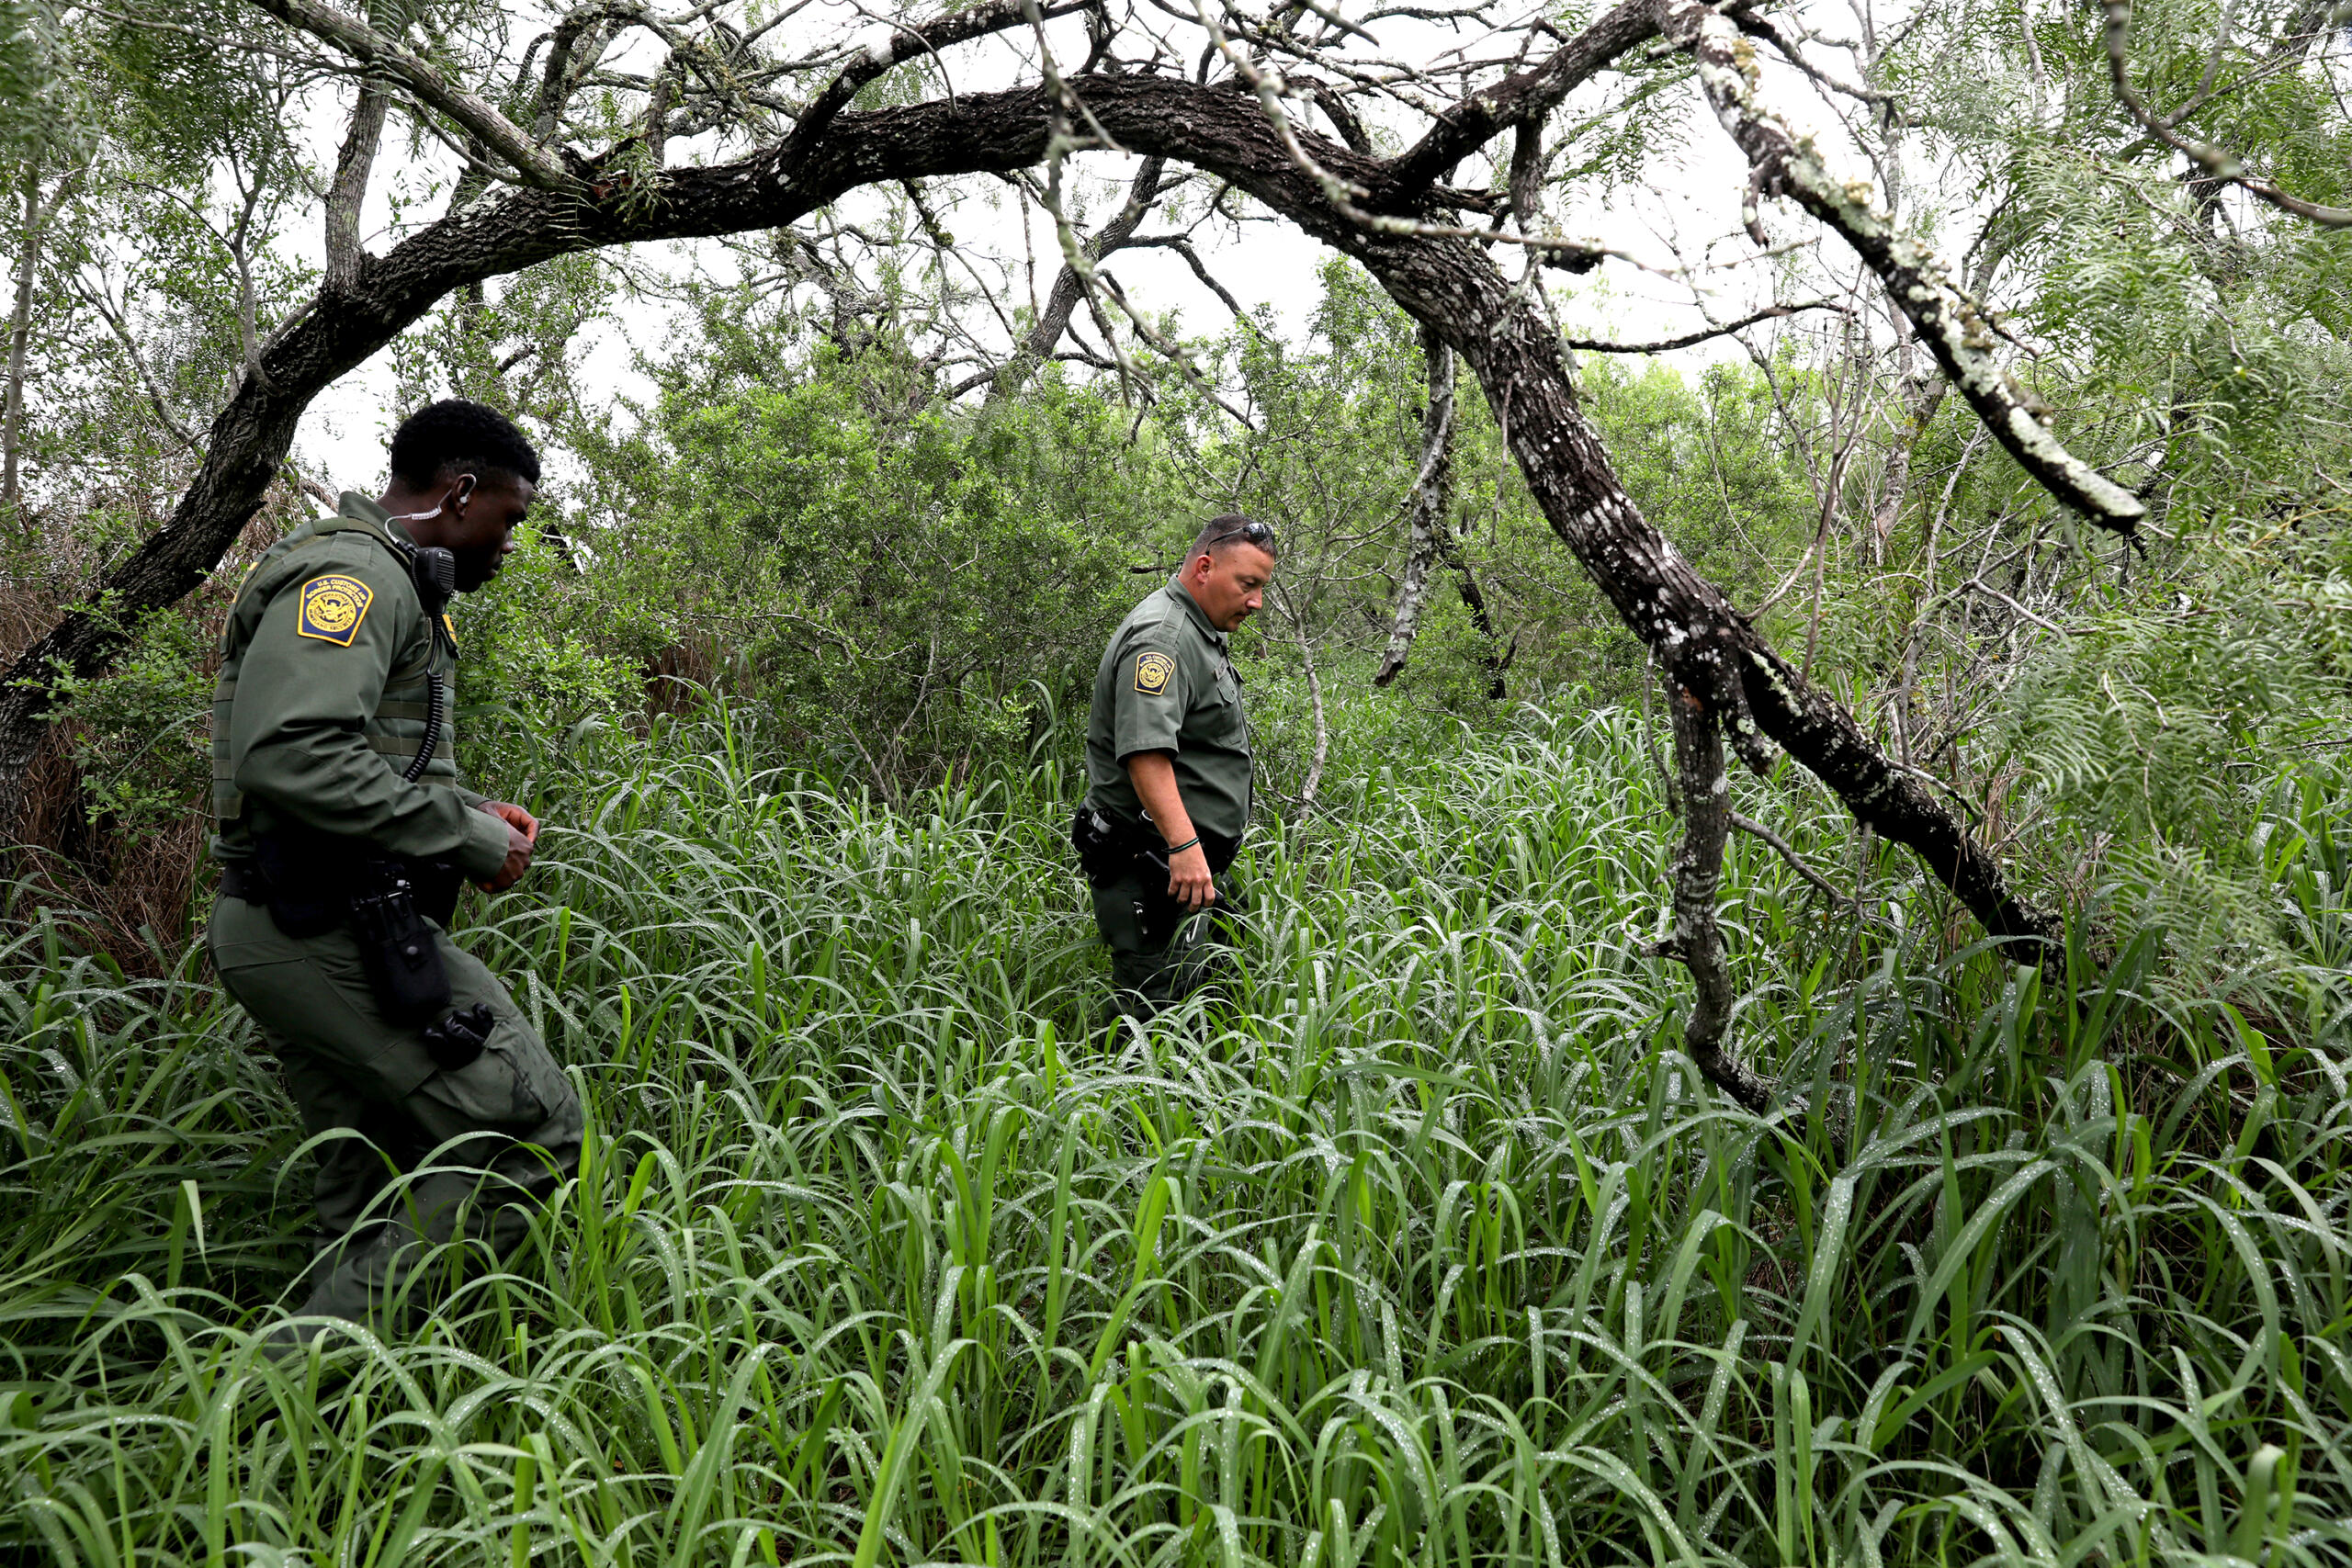 U.S. Customs and Border Protection Agents Ebenezar Oyenola, left, and Jaime Cavazos search for missing Honduran migrant Yoel Nieto Valladares, 25, on a south Texas ranch on June 3, 2021.